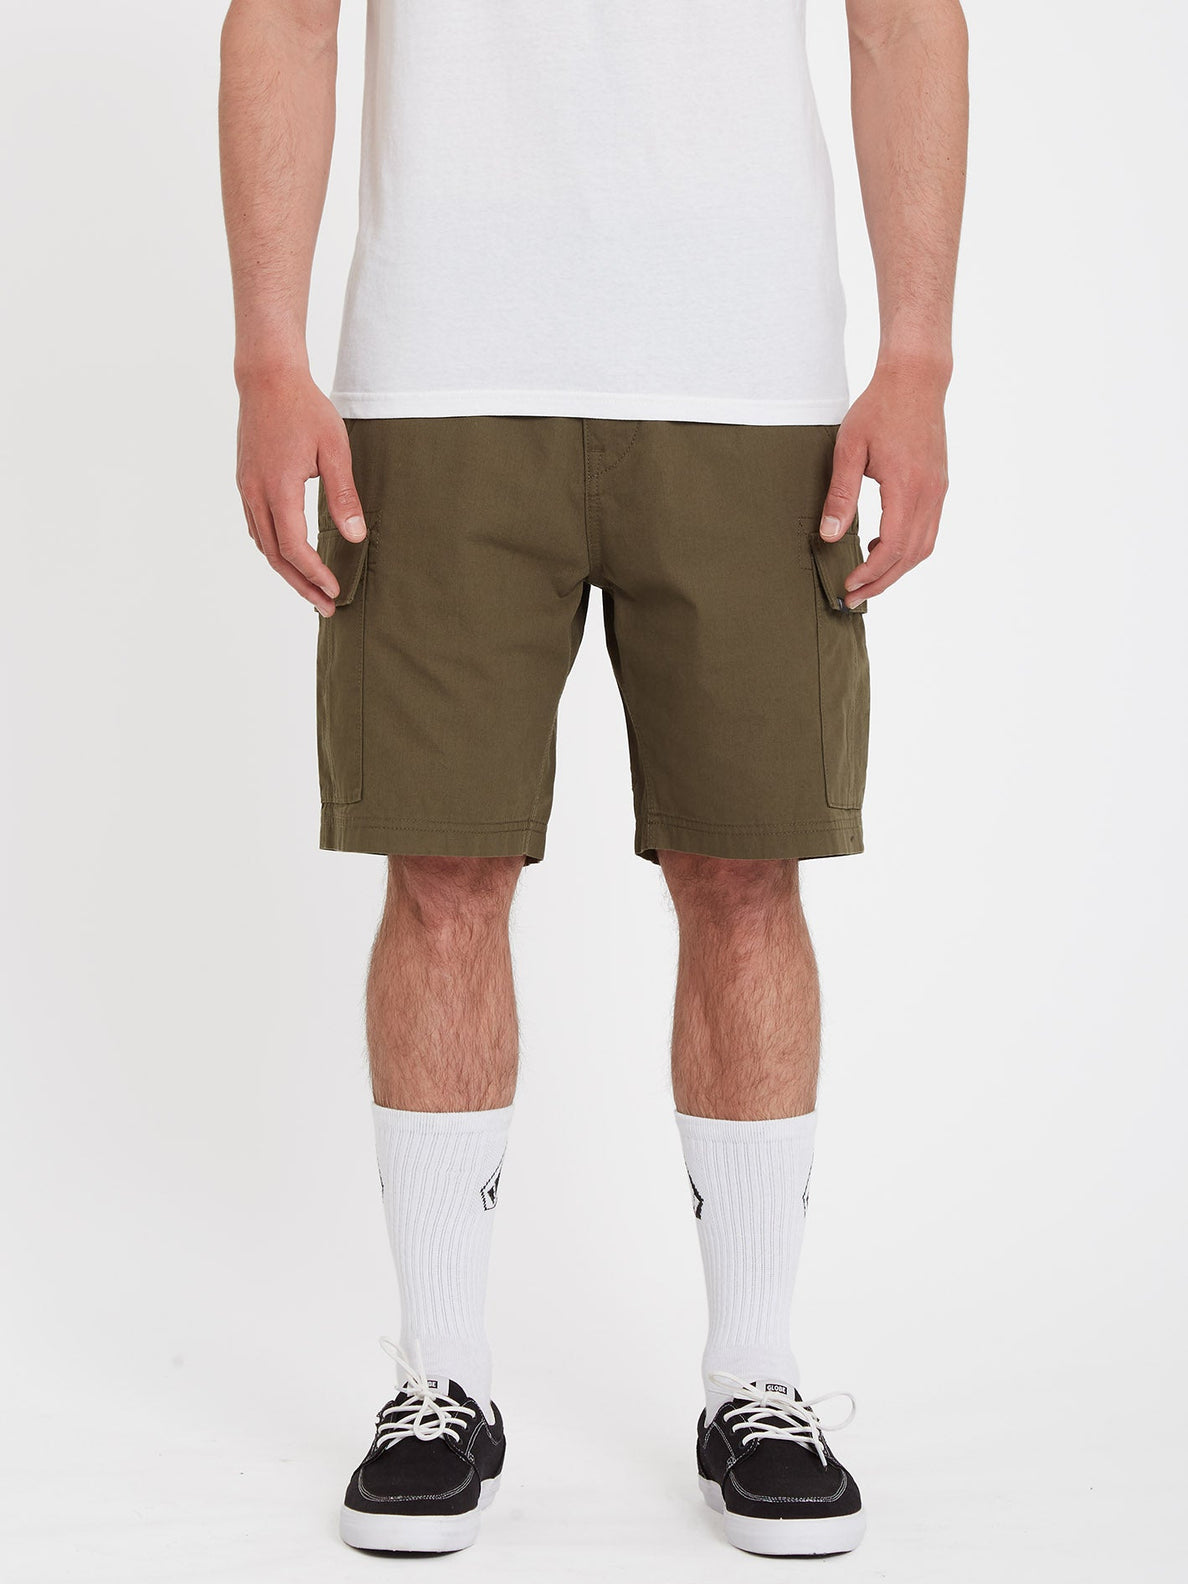 March Cargo Short - MILITARY (A0912302_MIL) [F]